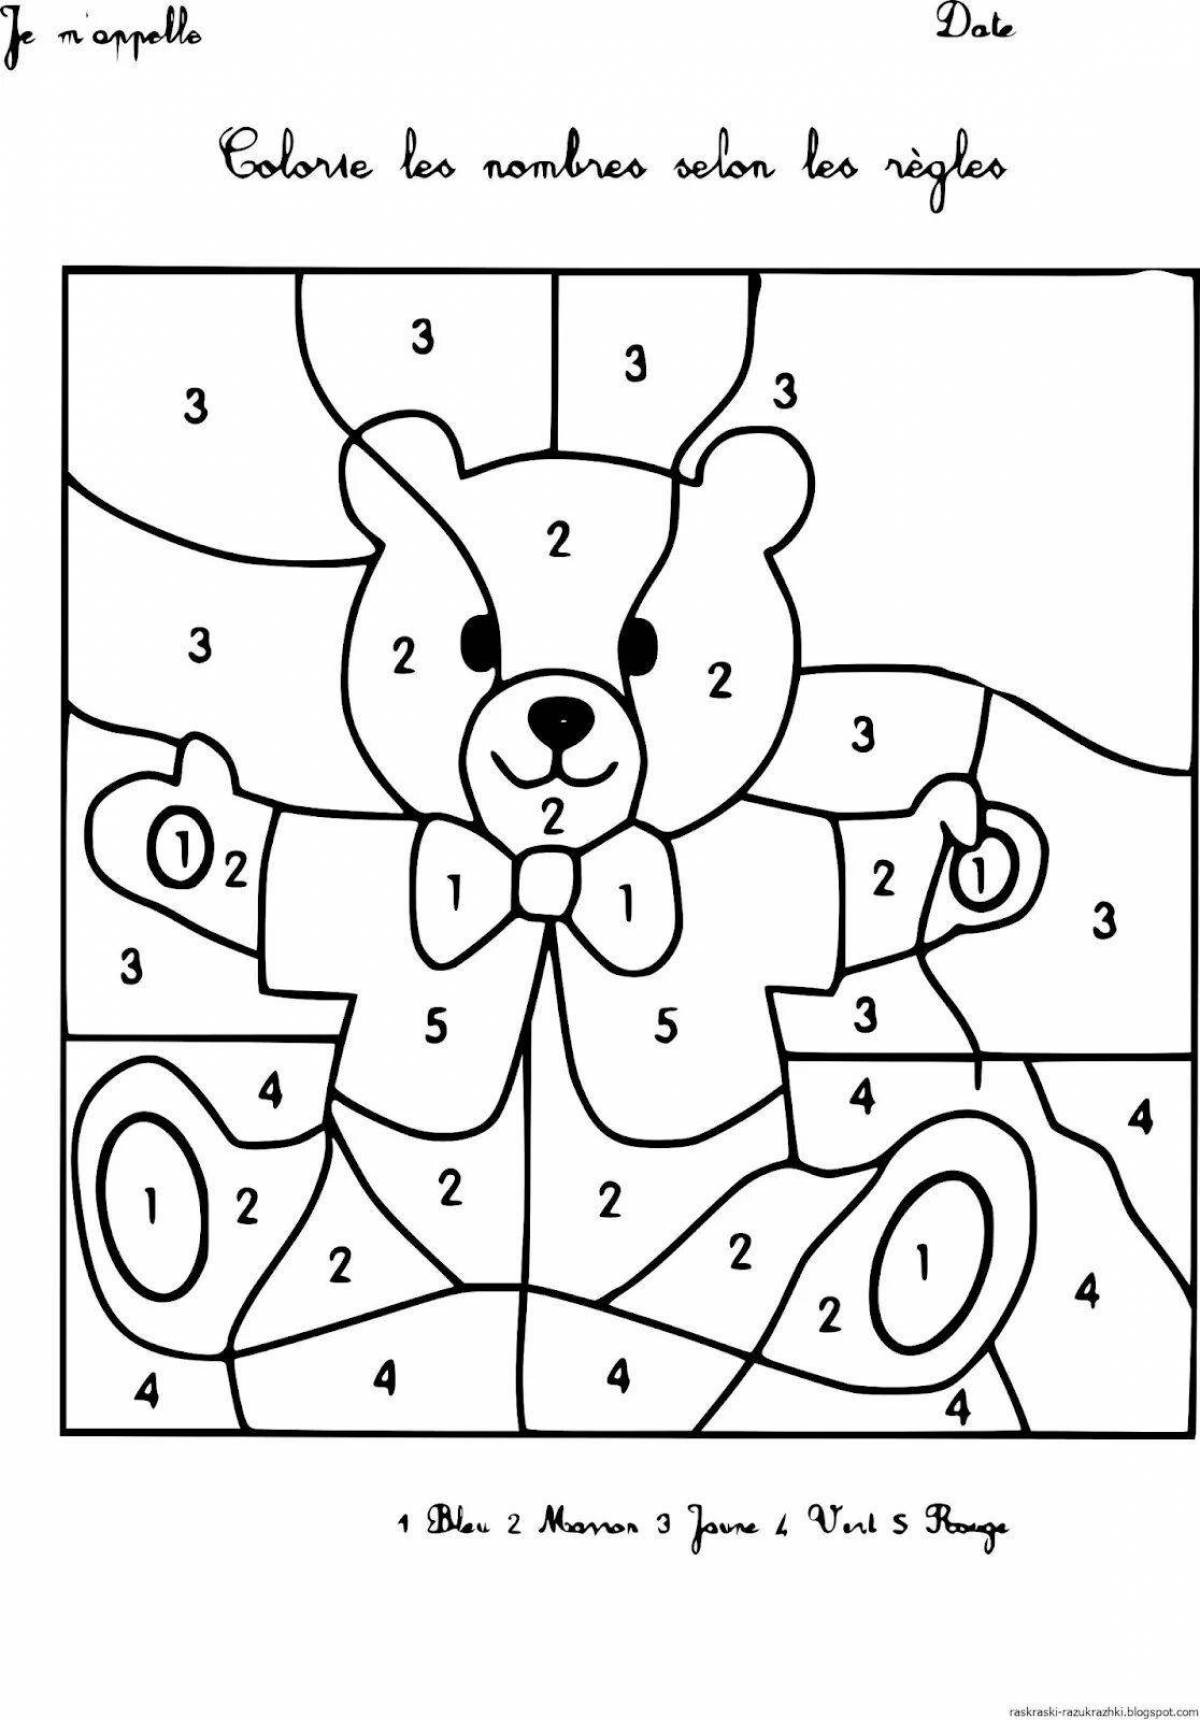 Creative coloring by numbers up to 10 for preschoolers